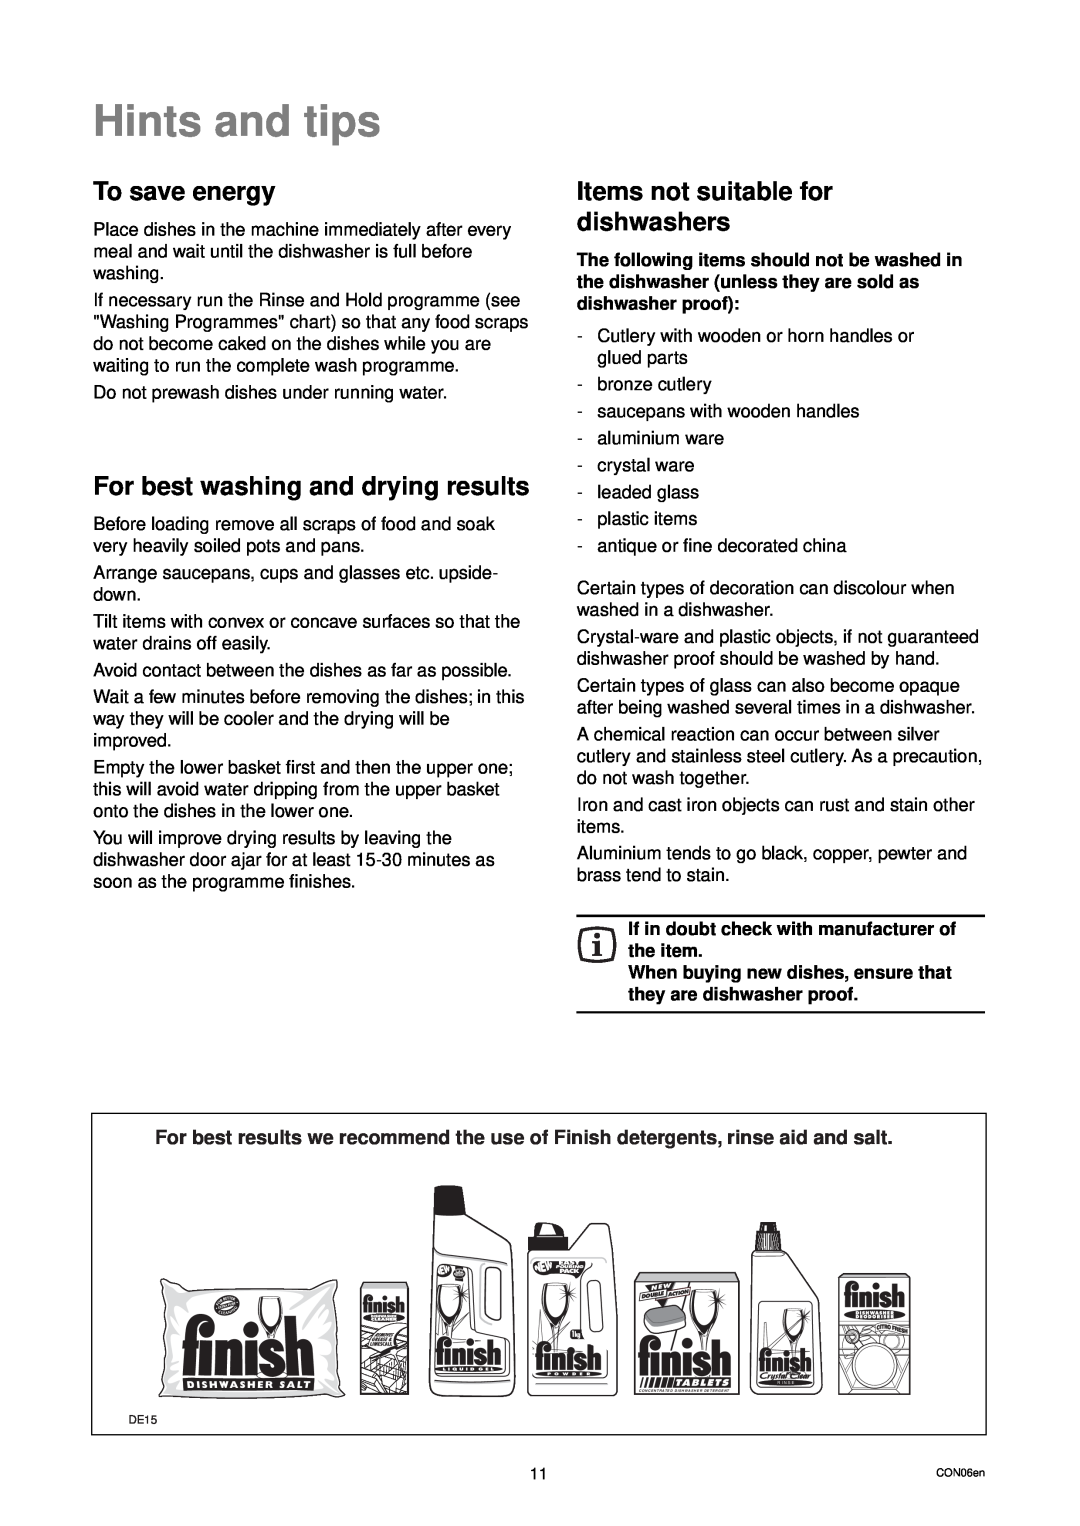 Zanussi DW 914 Hints and tips, To save energy, For best washing and drying results, Items not suitable for dishwashers 